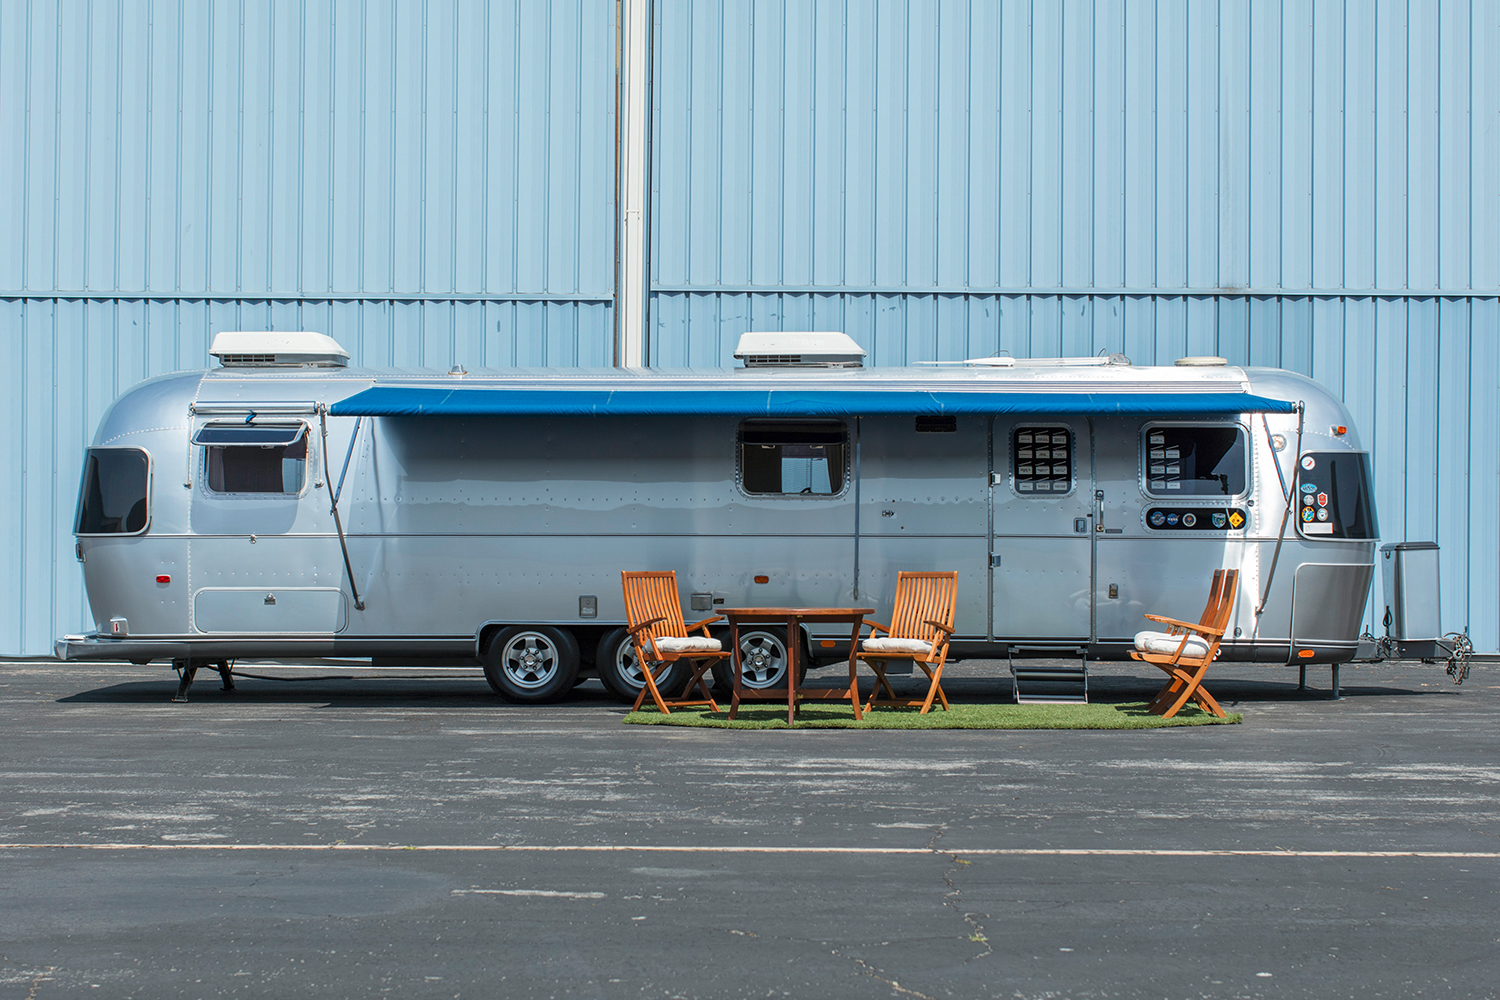 A 1992 Airstream Model 34 Limited Excella Travel Trailer owned by Tom Hanks. It's set to sell at the Bonhams Quail Lodge Auction as part of Monterey Car Week.